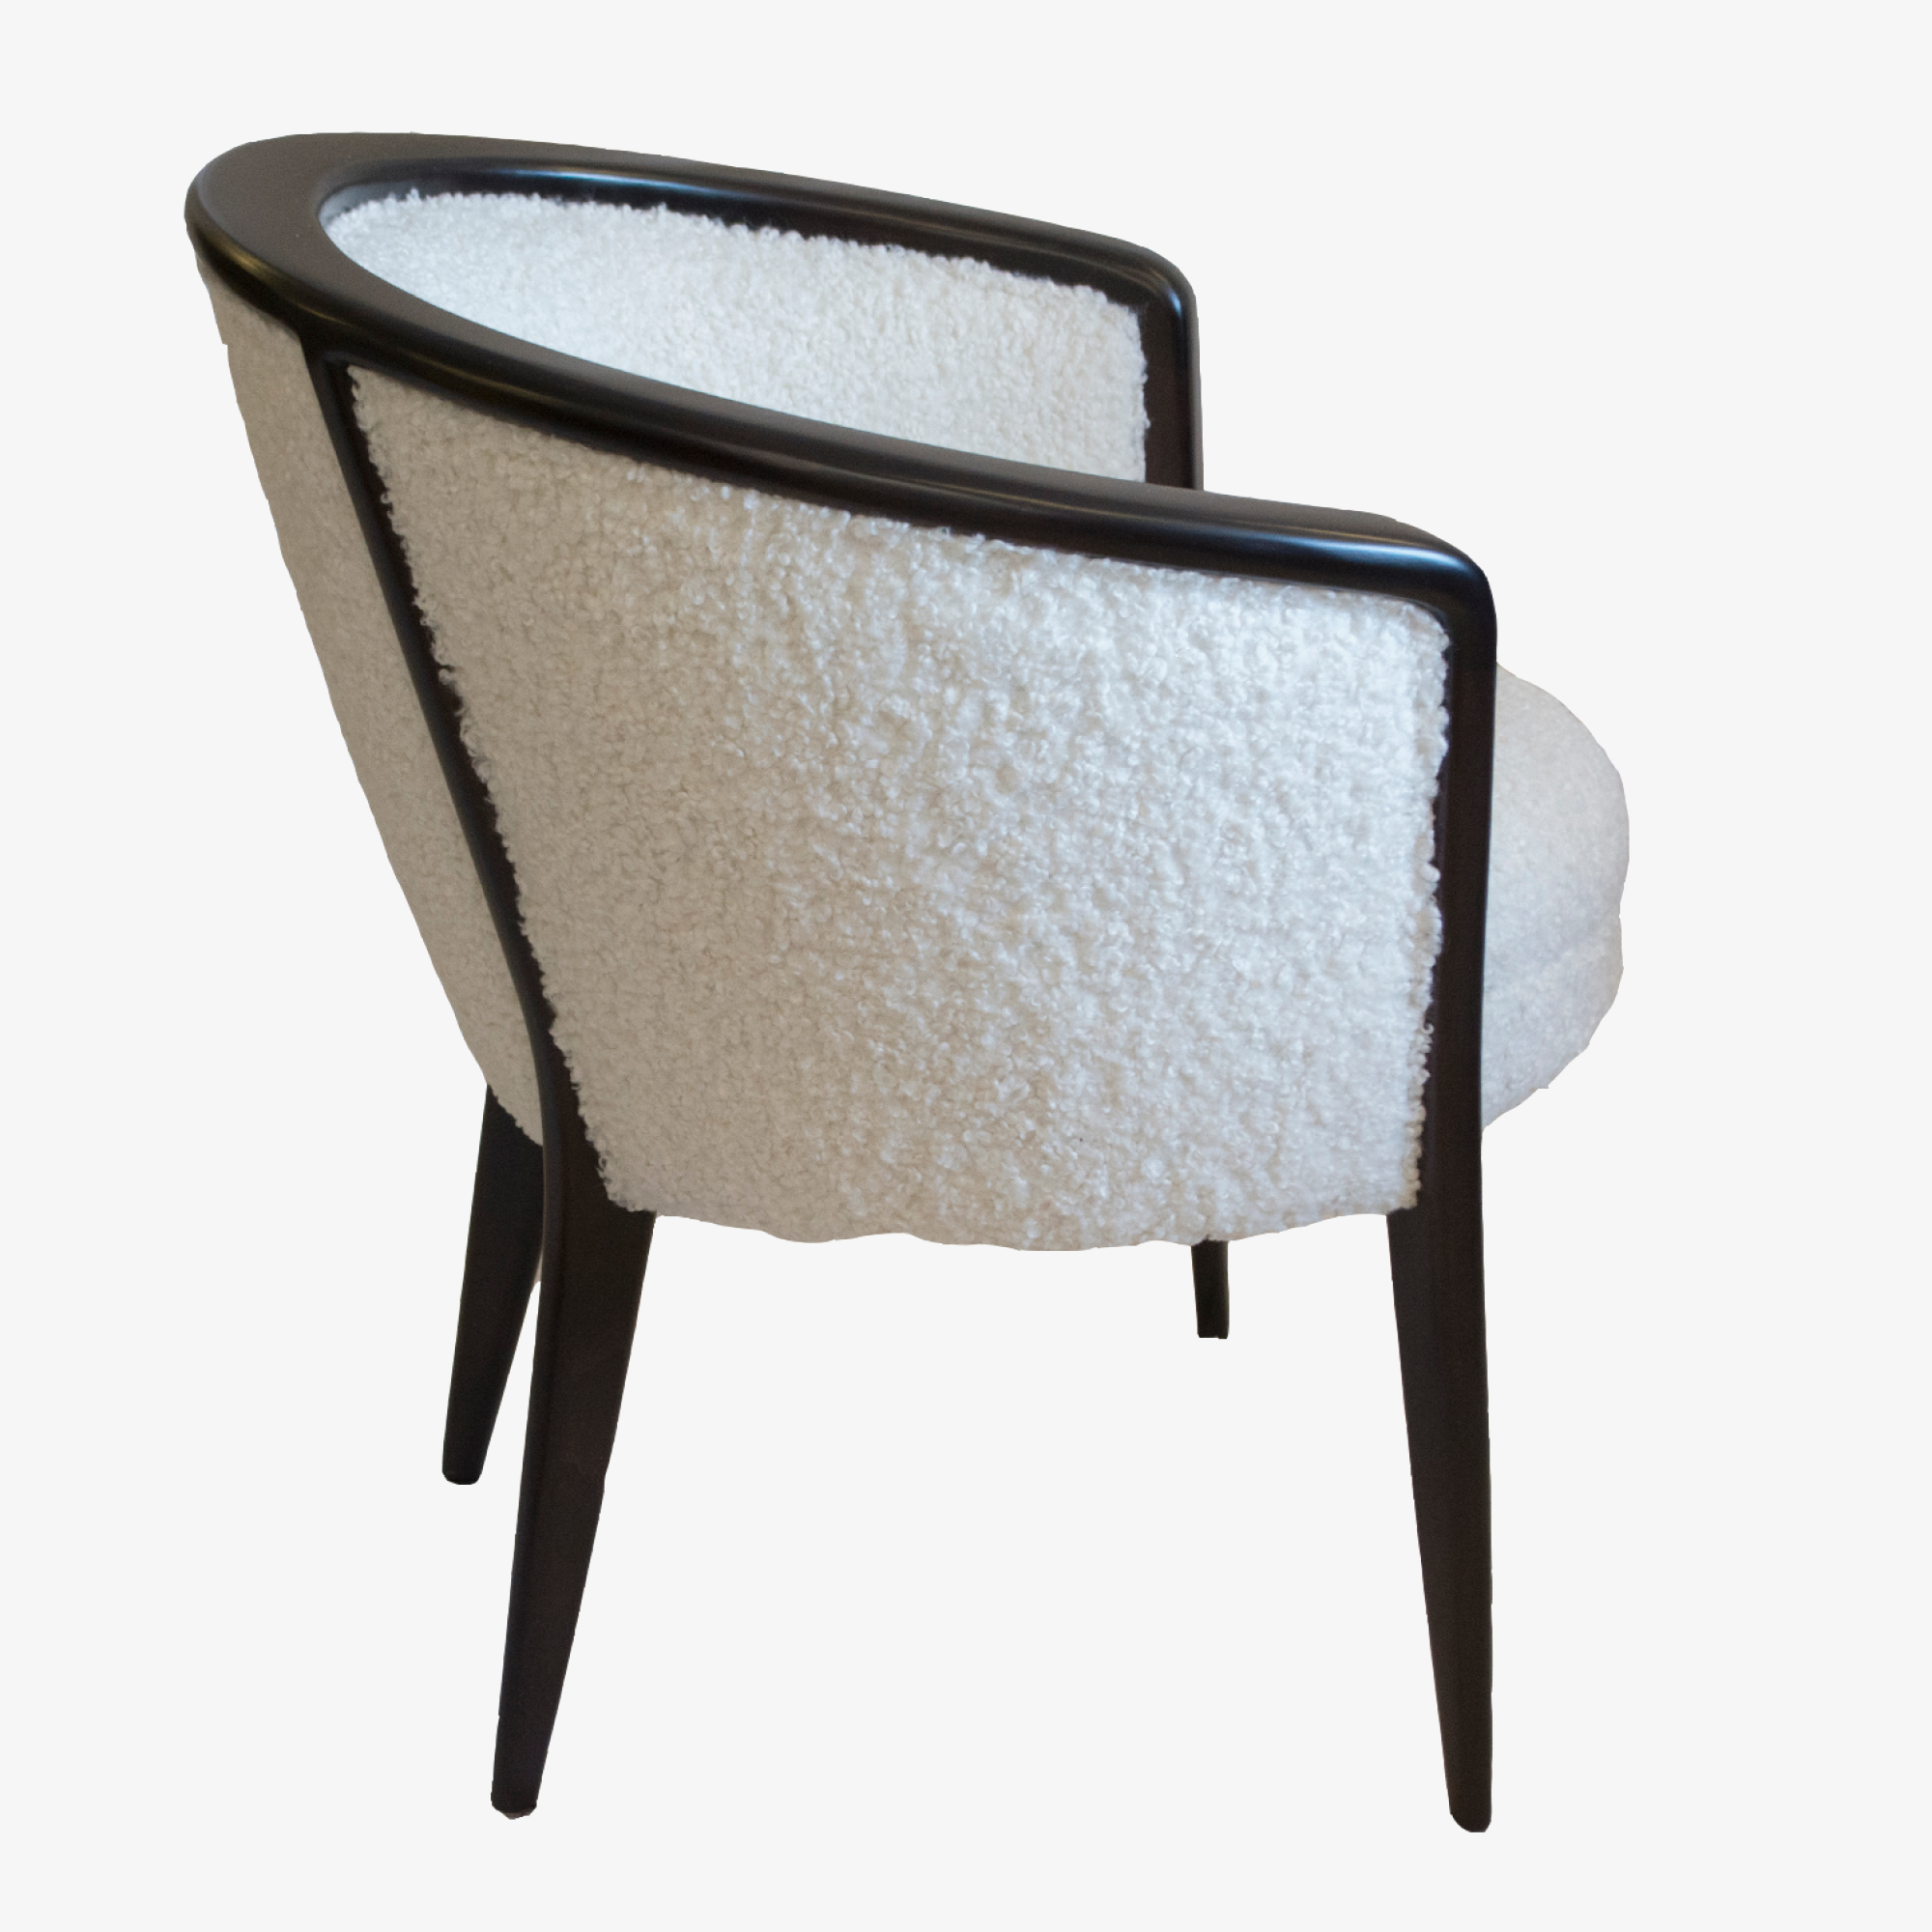 Bespoke French Barrel Chairs in Faux Shearling 4.png